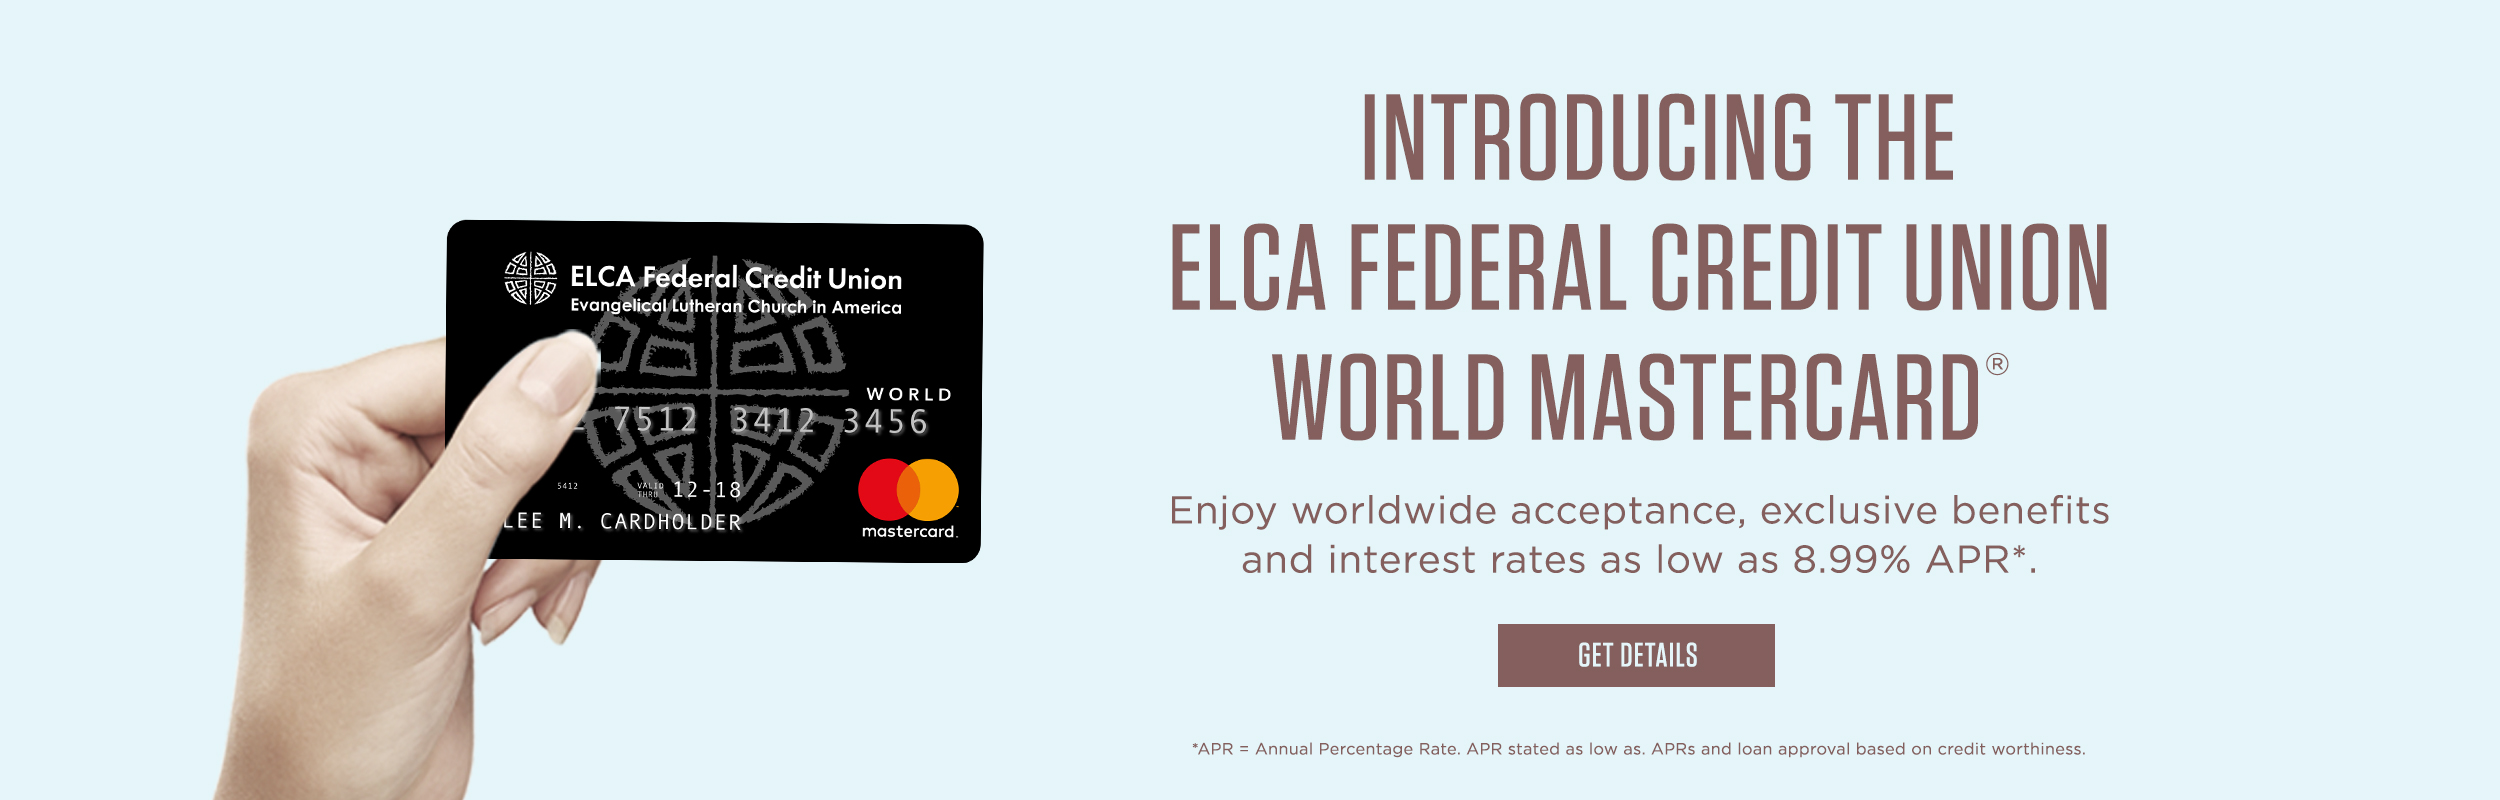 Introducing the ELCA Federal Credit Union World Master Card